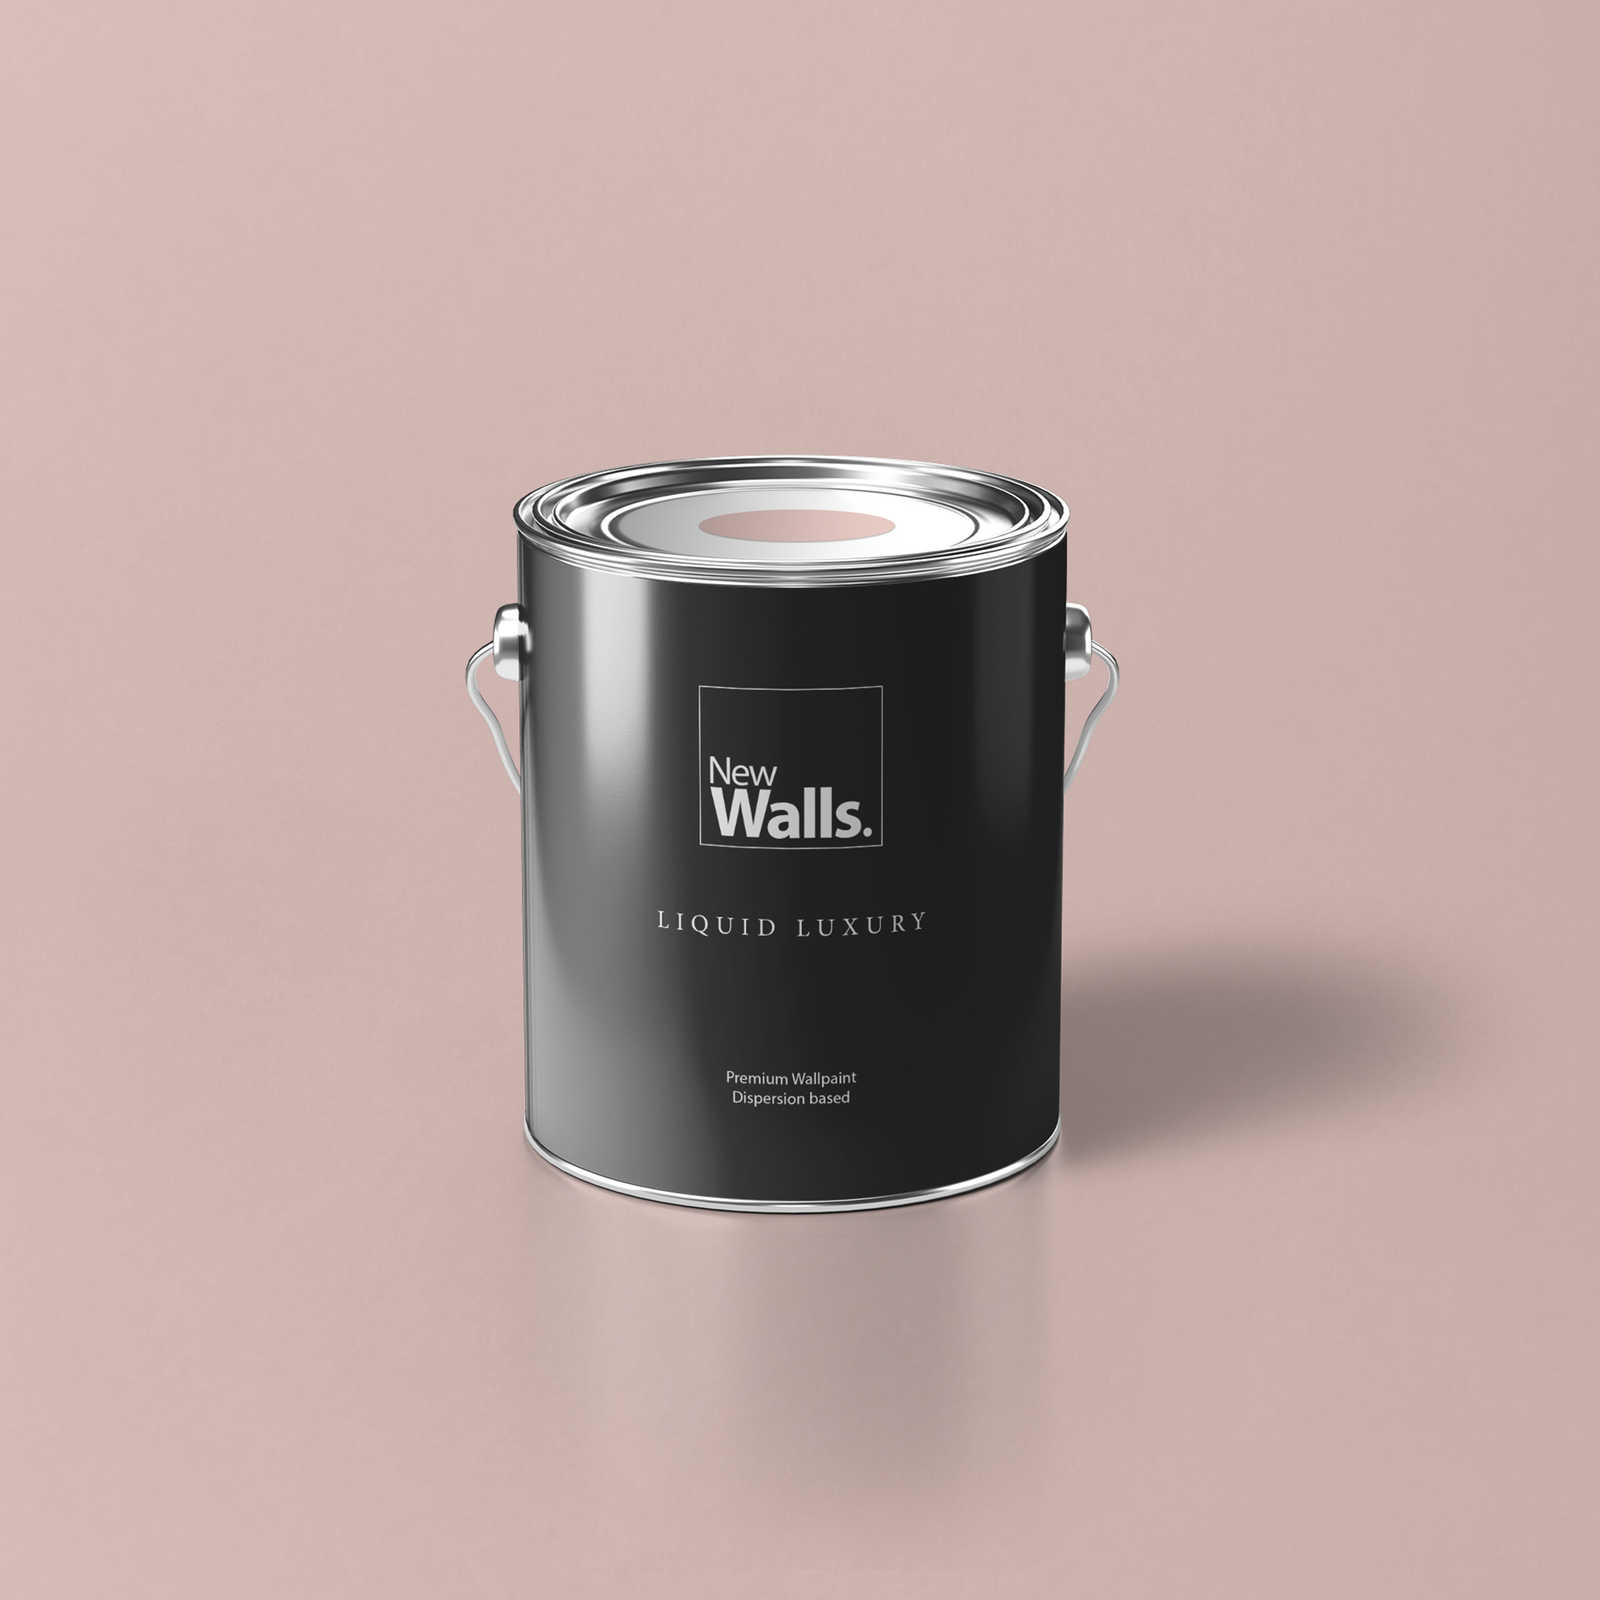 Premium Wall Paint Homely Old Pink »Luxury Lipstick« NW1001 – 2.5 litre
